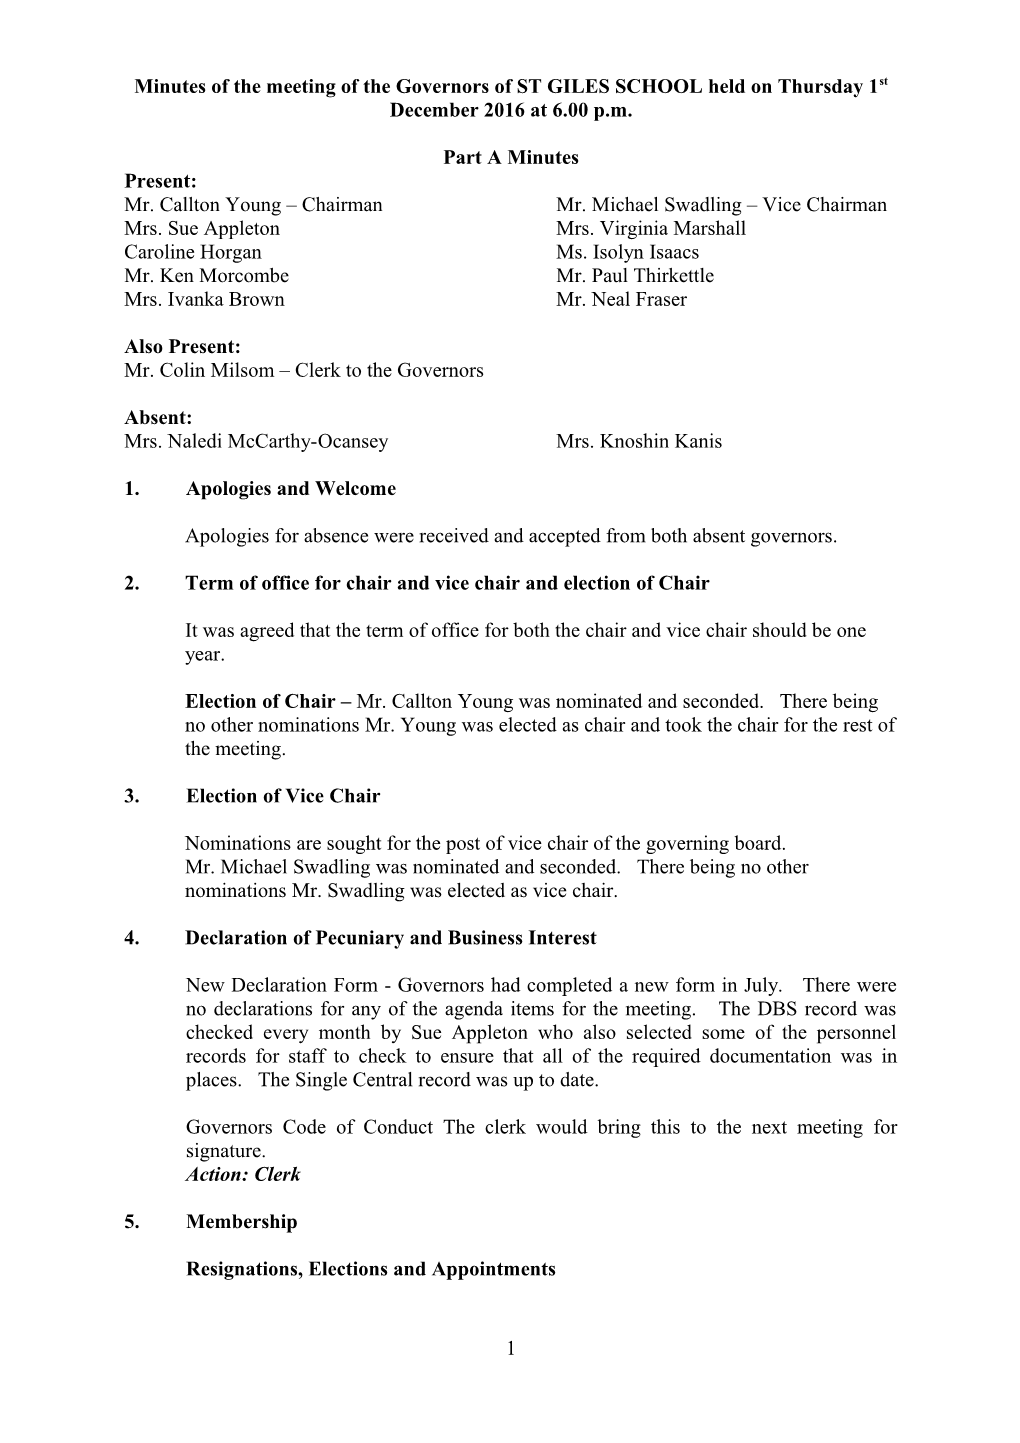 Minutes of the Meeting of the Governors of ST GILES SCHOOL Held Onthursday 1St December